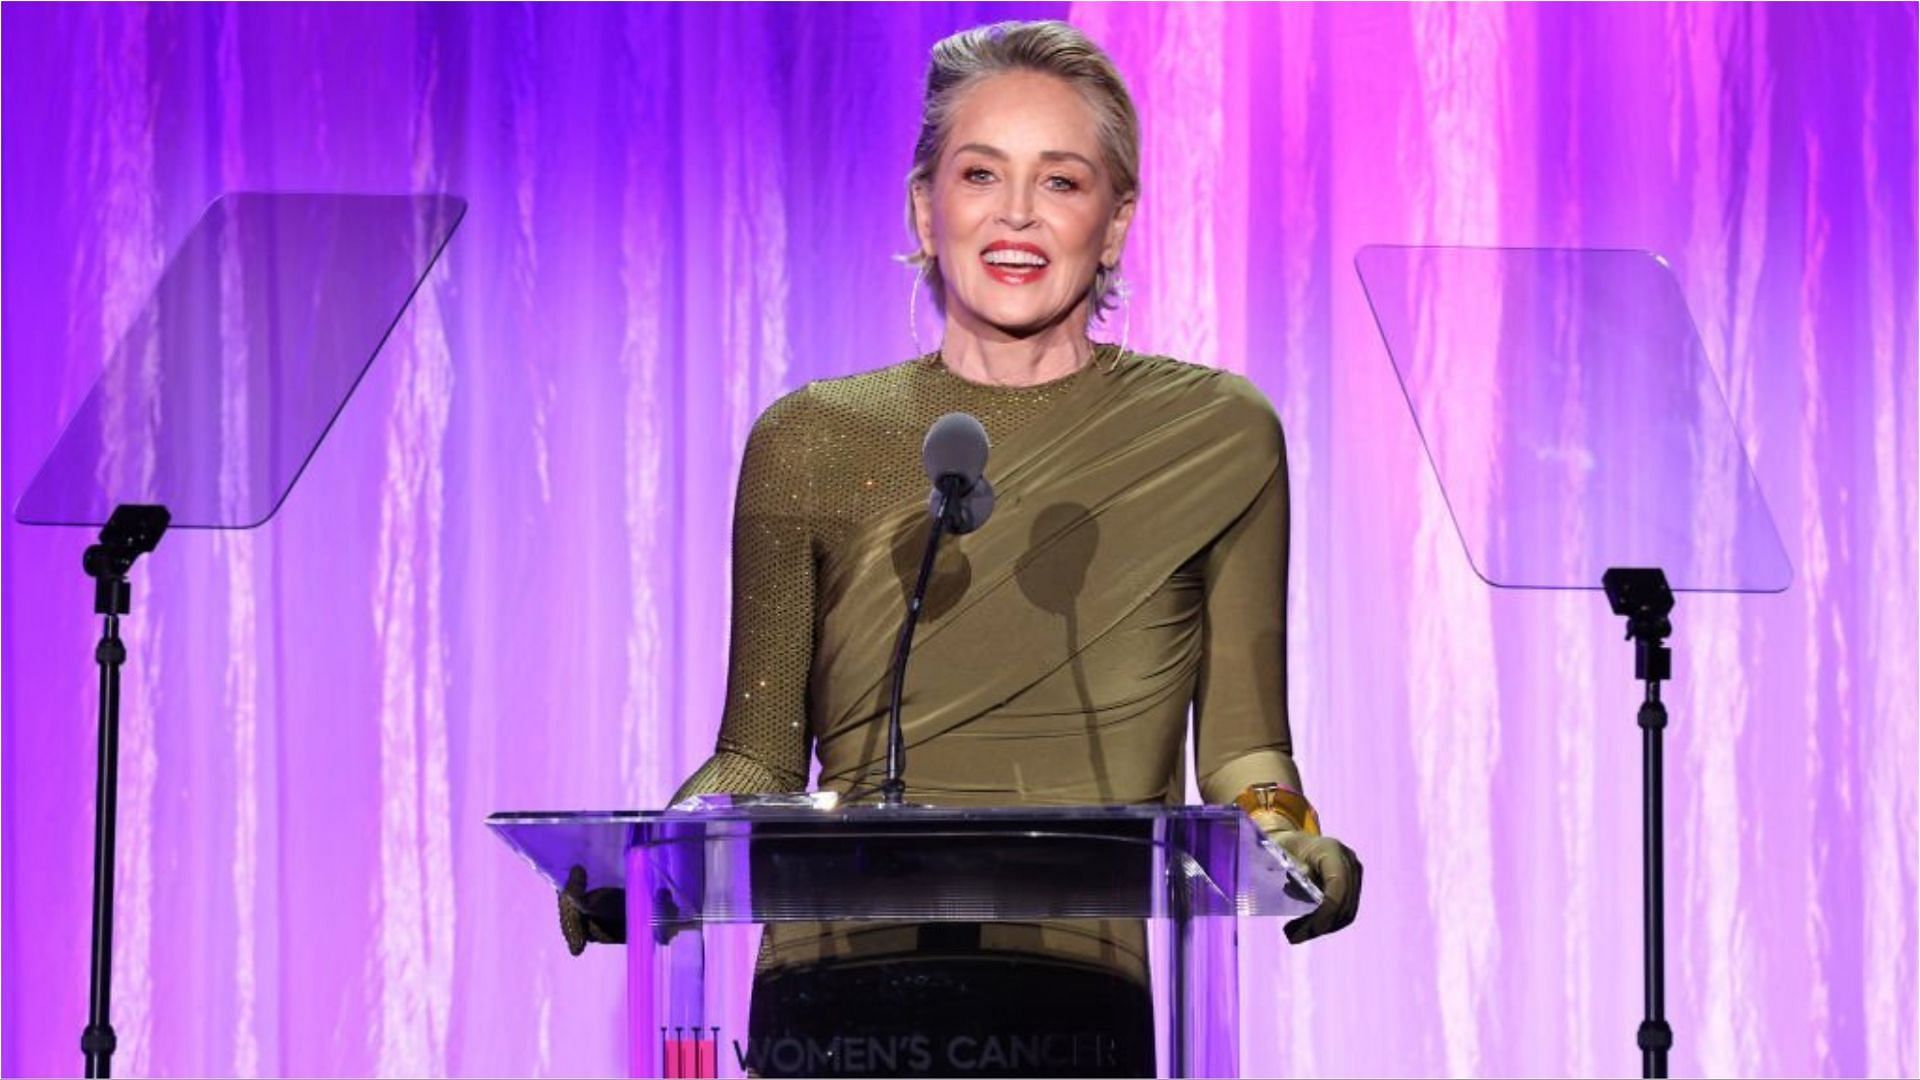 Sharon Stone has lost her money in the SVB collapse (Image via Phillip Faraone/Getty Images)